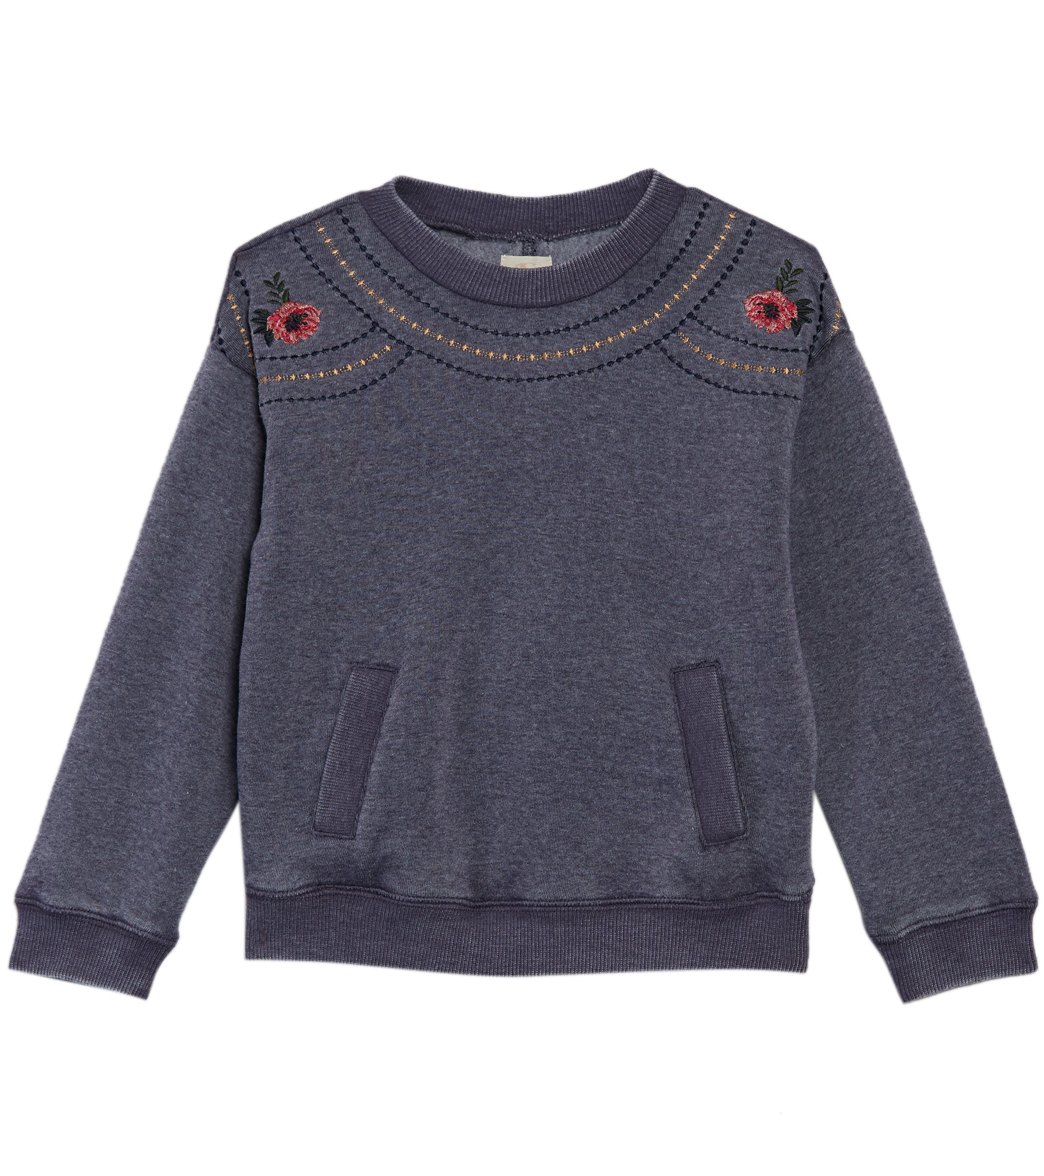 O'neill Girls' Charlotte Pull Over Fleece - Grey 2T Cotton/Polyester/Viscose - Swimoutlet.com